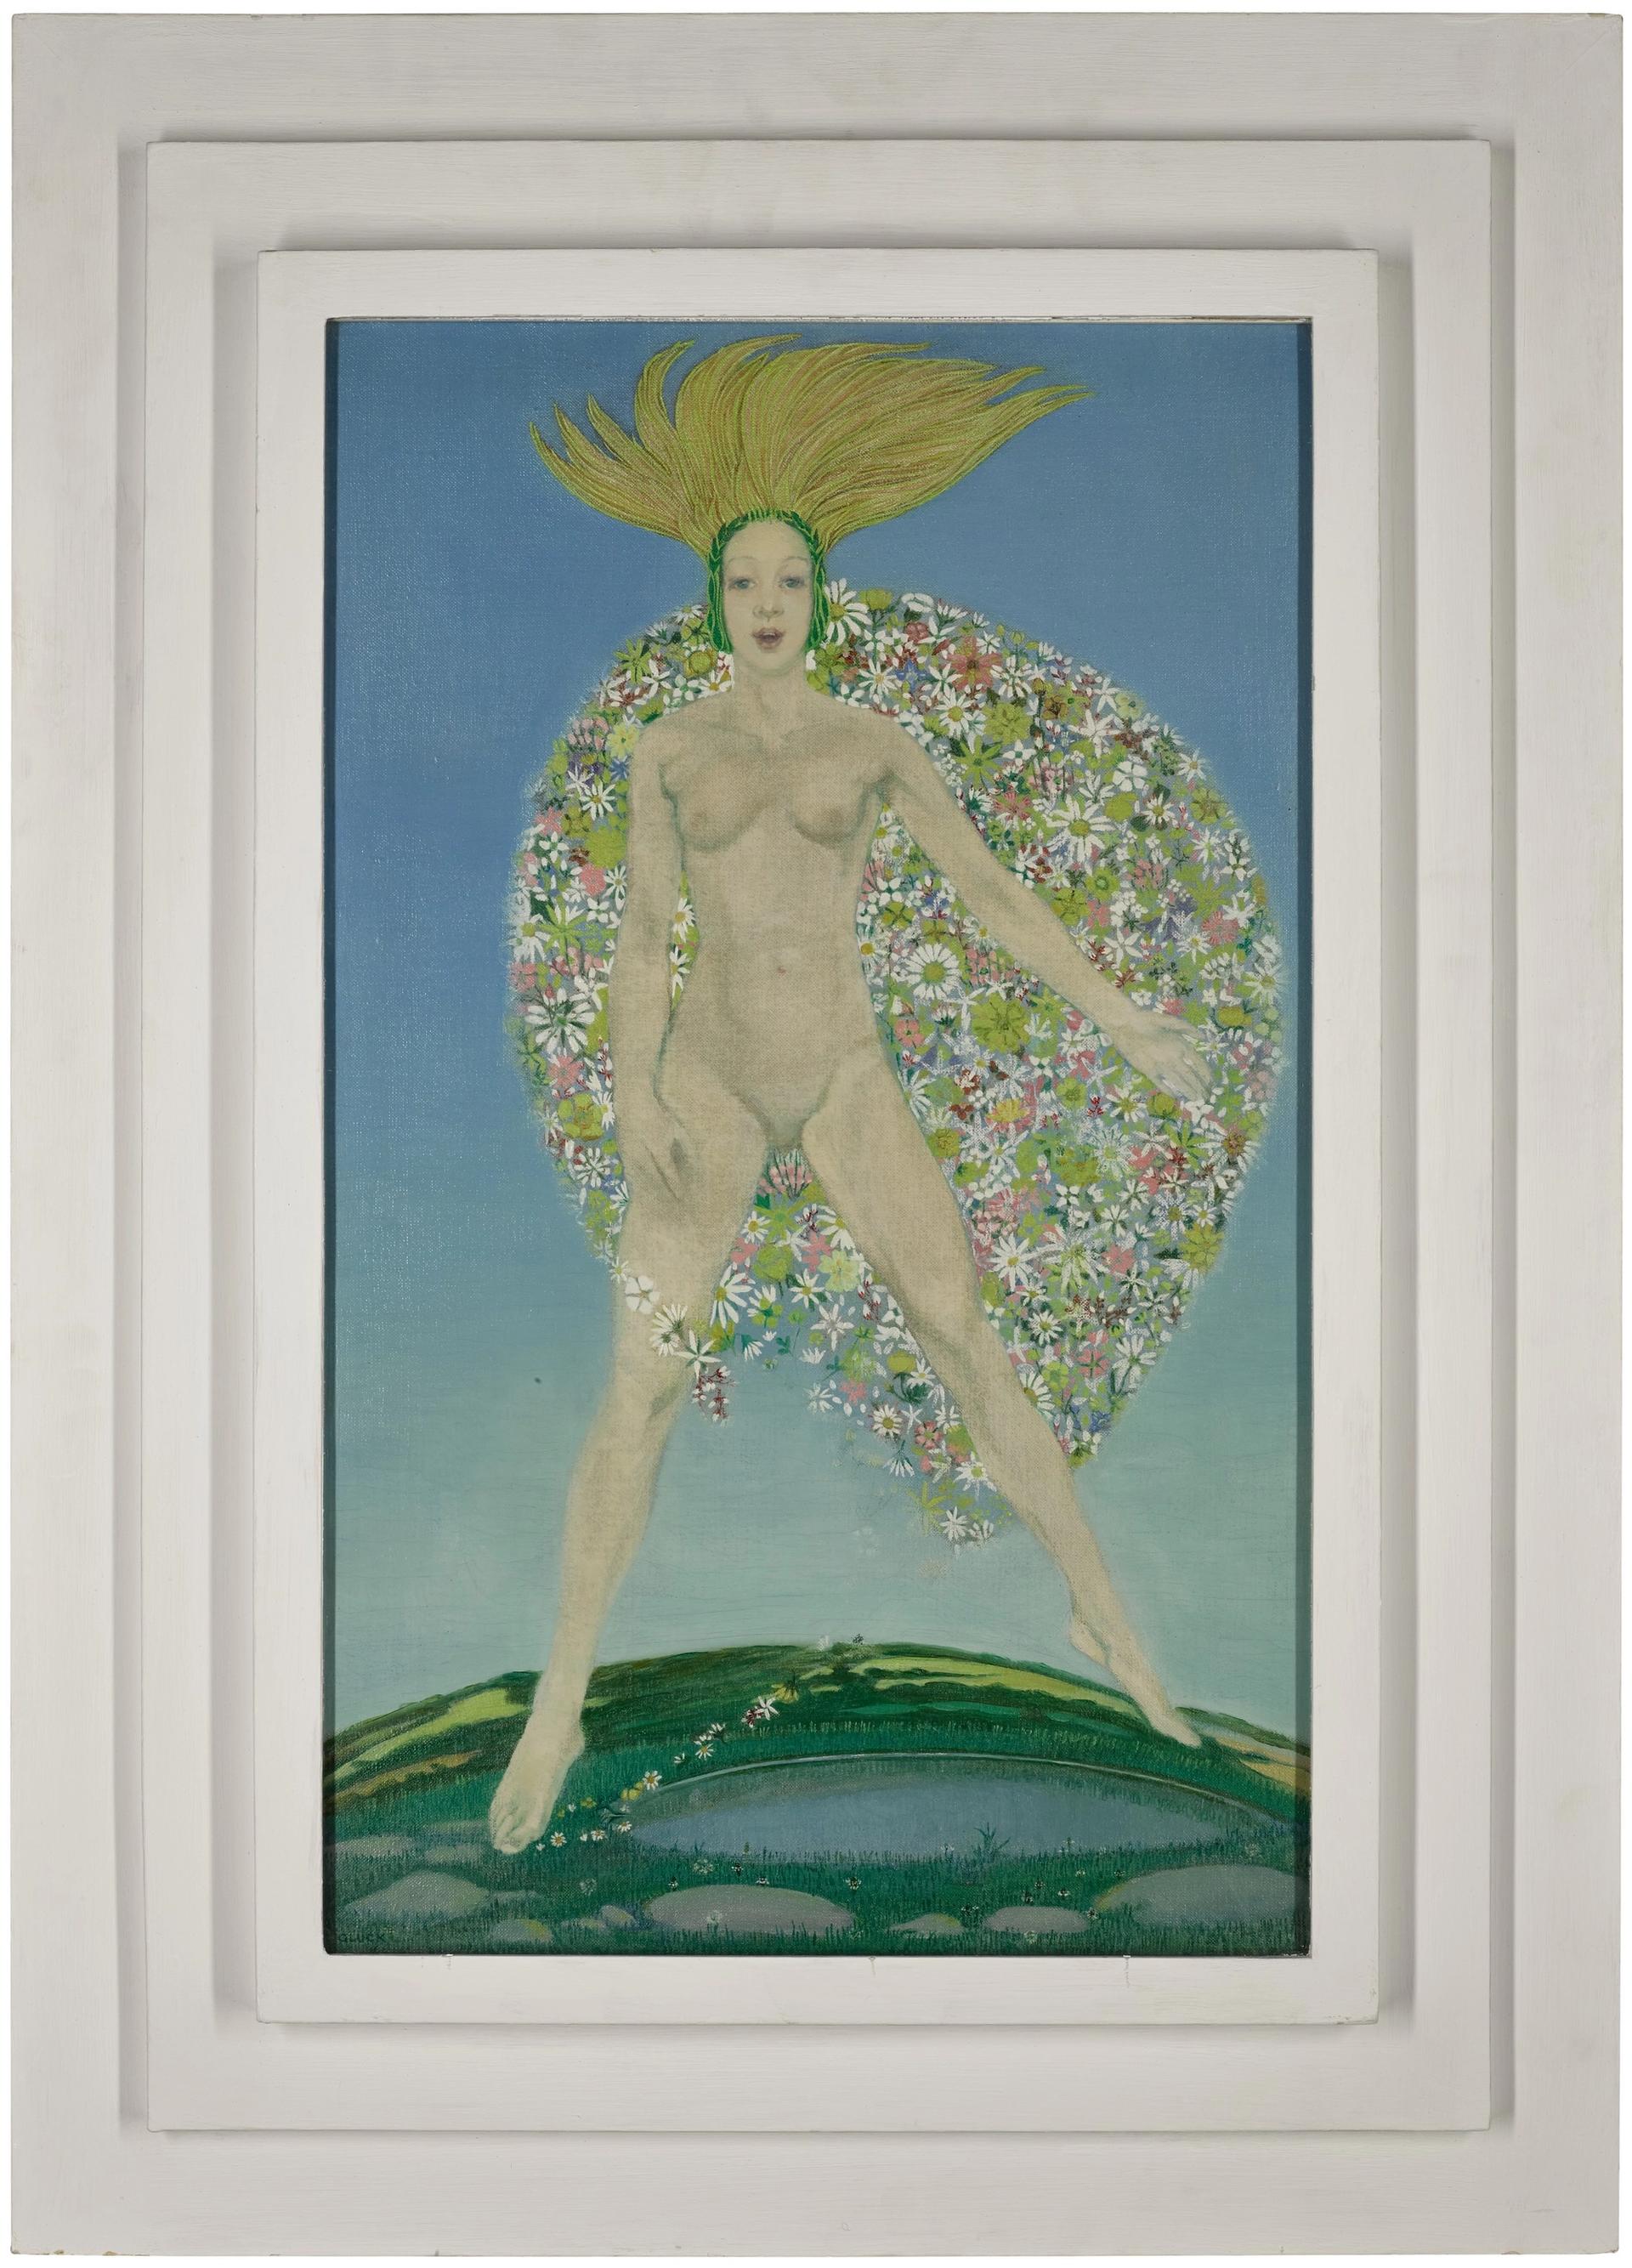 Gluck’s Flora’s Cloak (around 1923) sold for £100,000 (est £80,000-£120,000) Courtesy of Sotheby's